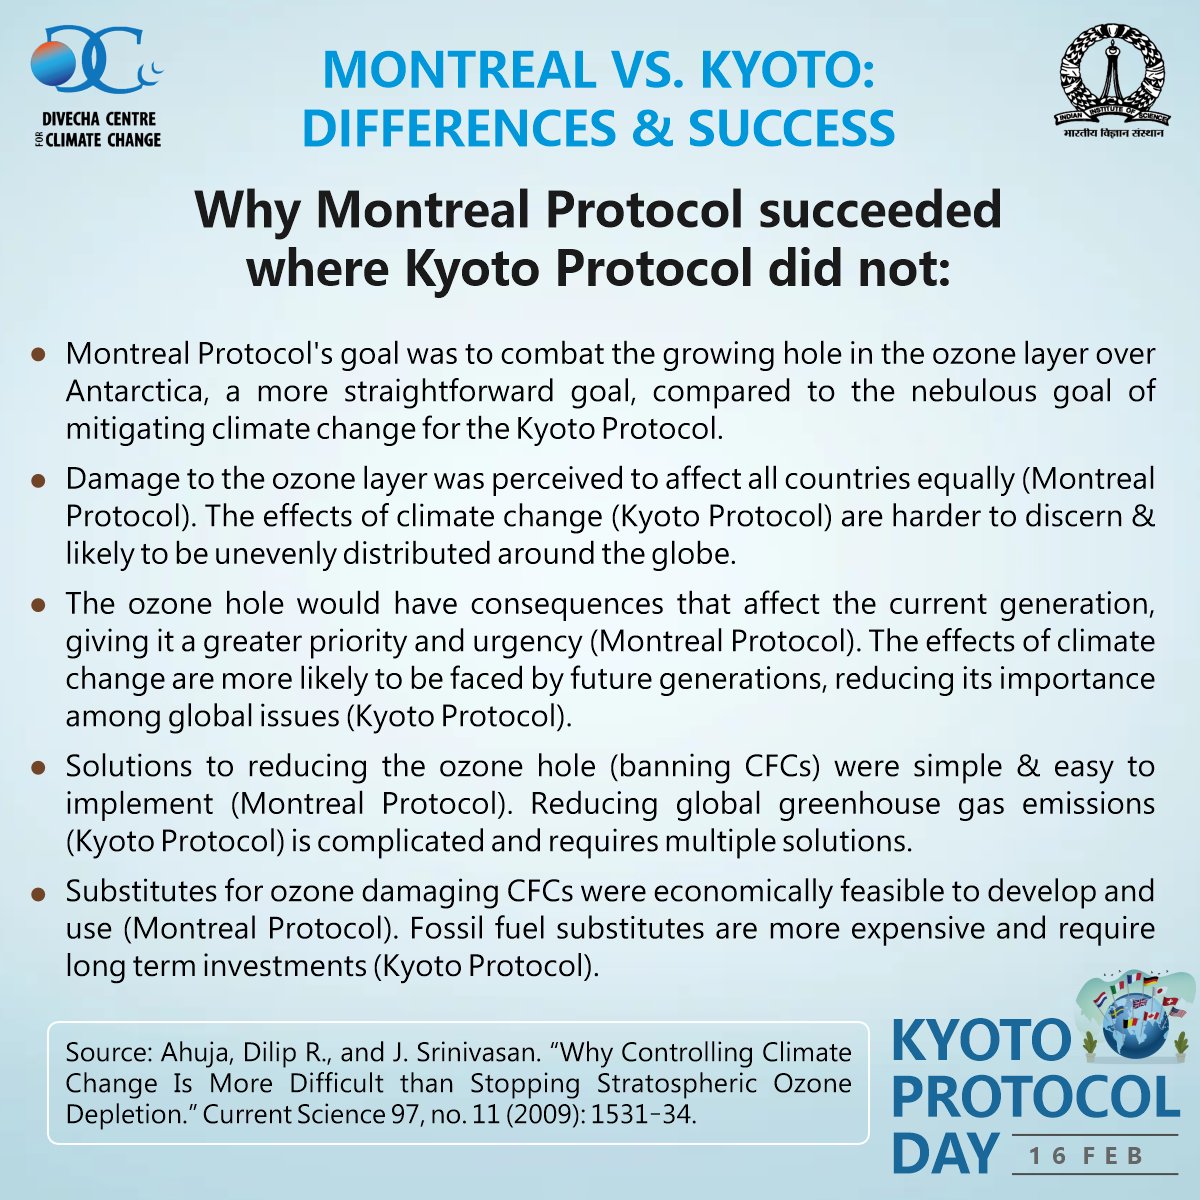 On Kyoto Protocol Day, we discuss why the Montreal protocol had greater success than the Kyoto Protocol.
.
.
.
.
#KyotoProtocolDay  #montrealprotocol #climatestrike #climatechangeaction #enviromentalhealth #sciencelover #scienceknowledge #sciencefacts
#gkinhindi #climatechange